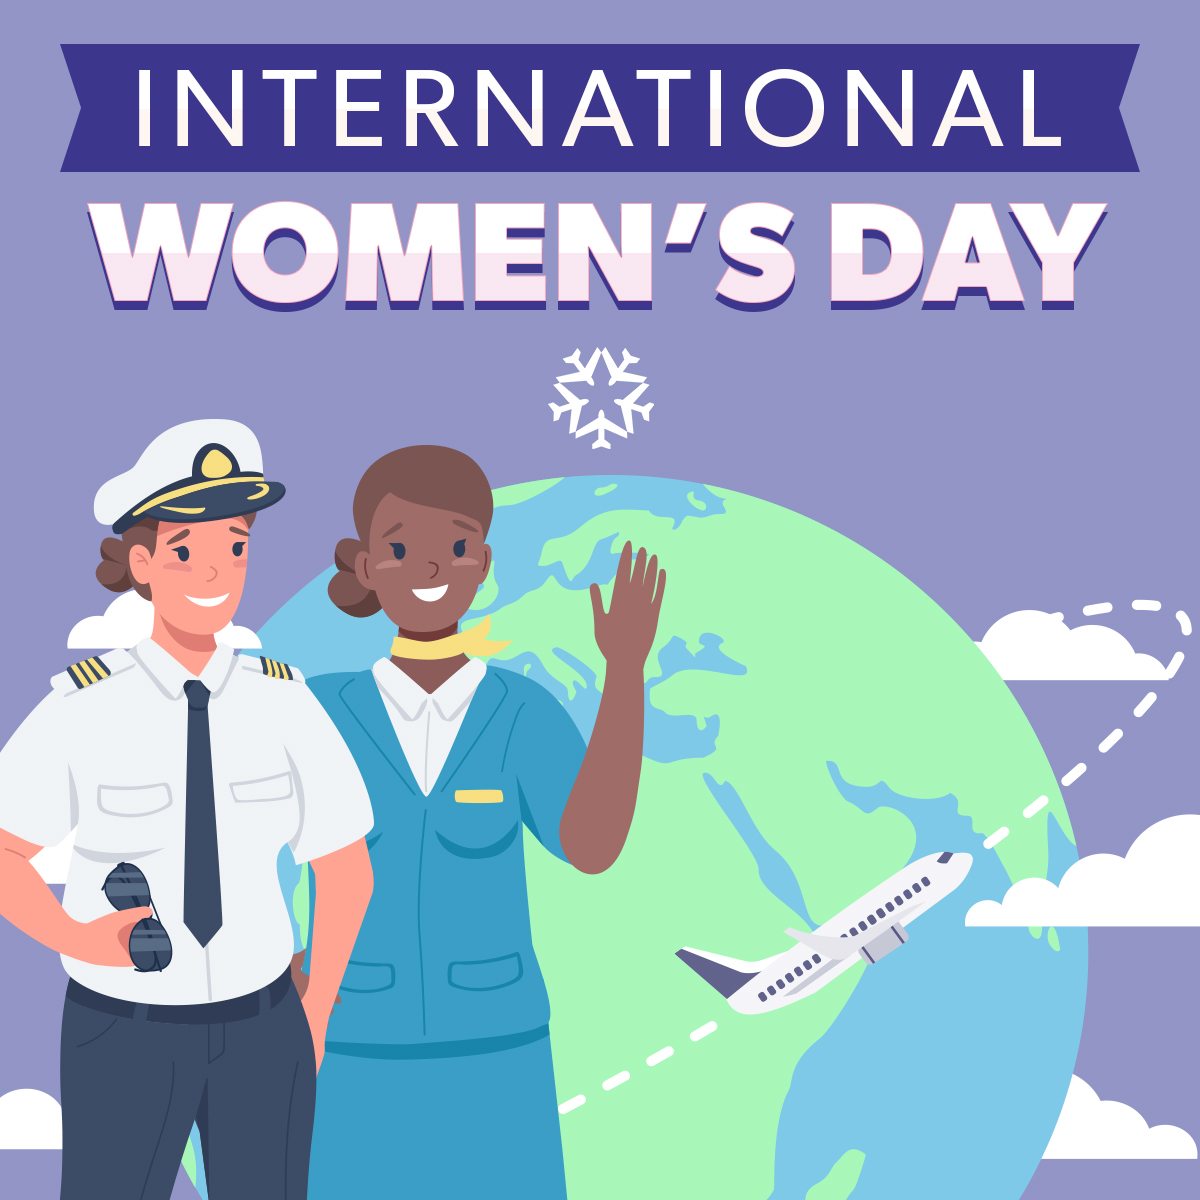 Happy #InternationalWomensDay! Today we celebrate women everywhere, especially those who help us take flight including pilots, flight attendants, aviation maintenance technicians and more! ✈️👩🏼‍✈️👩🏾‍✈️